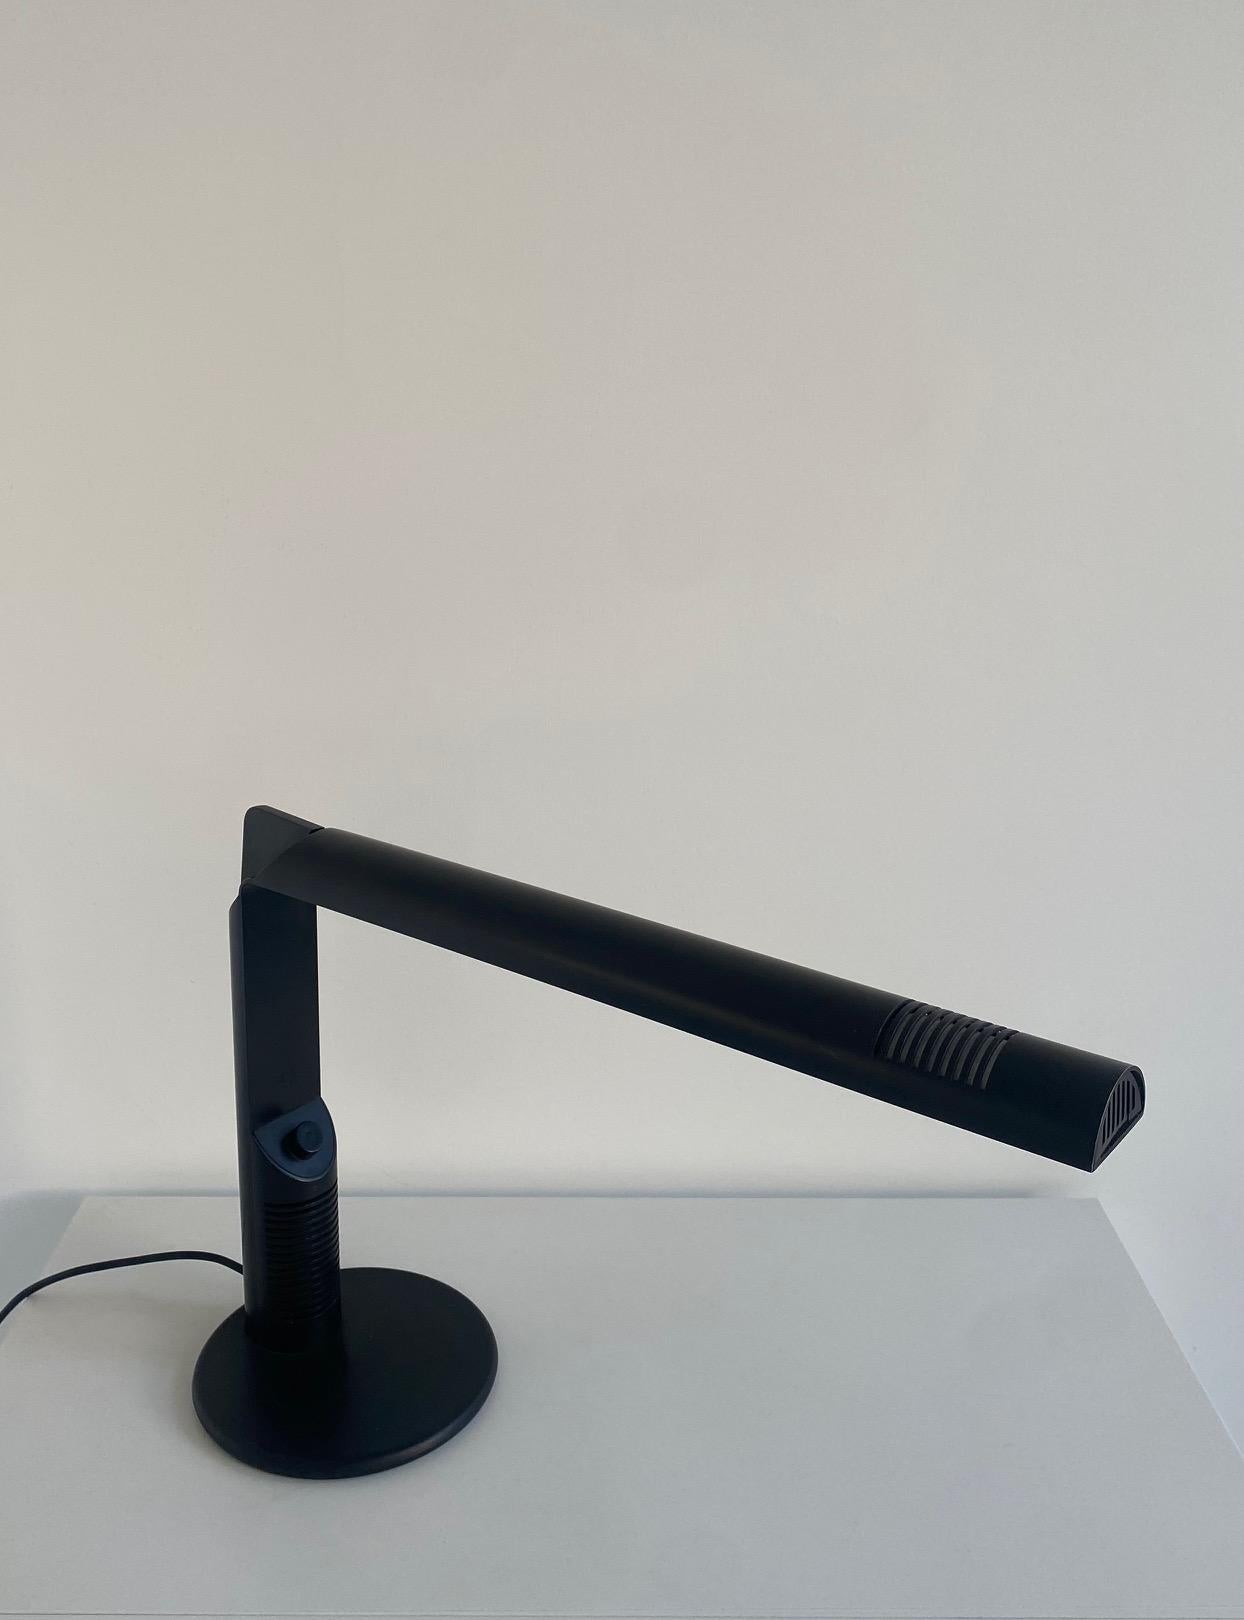 Metal Abele Table Lamp by Gianfranco Frattini for Luci, Italy, 1979 For Sale